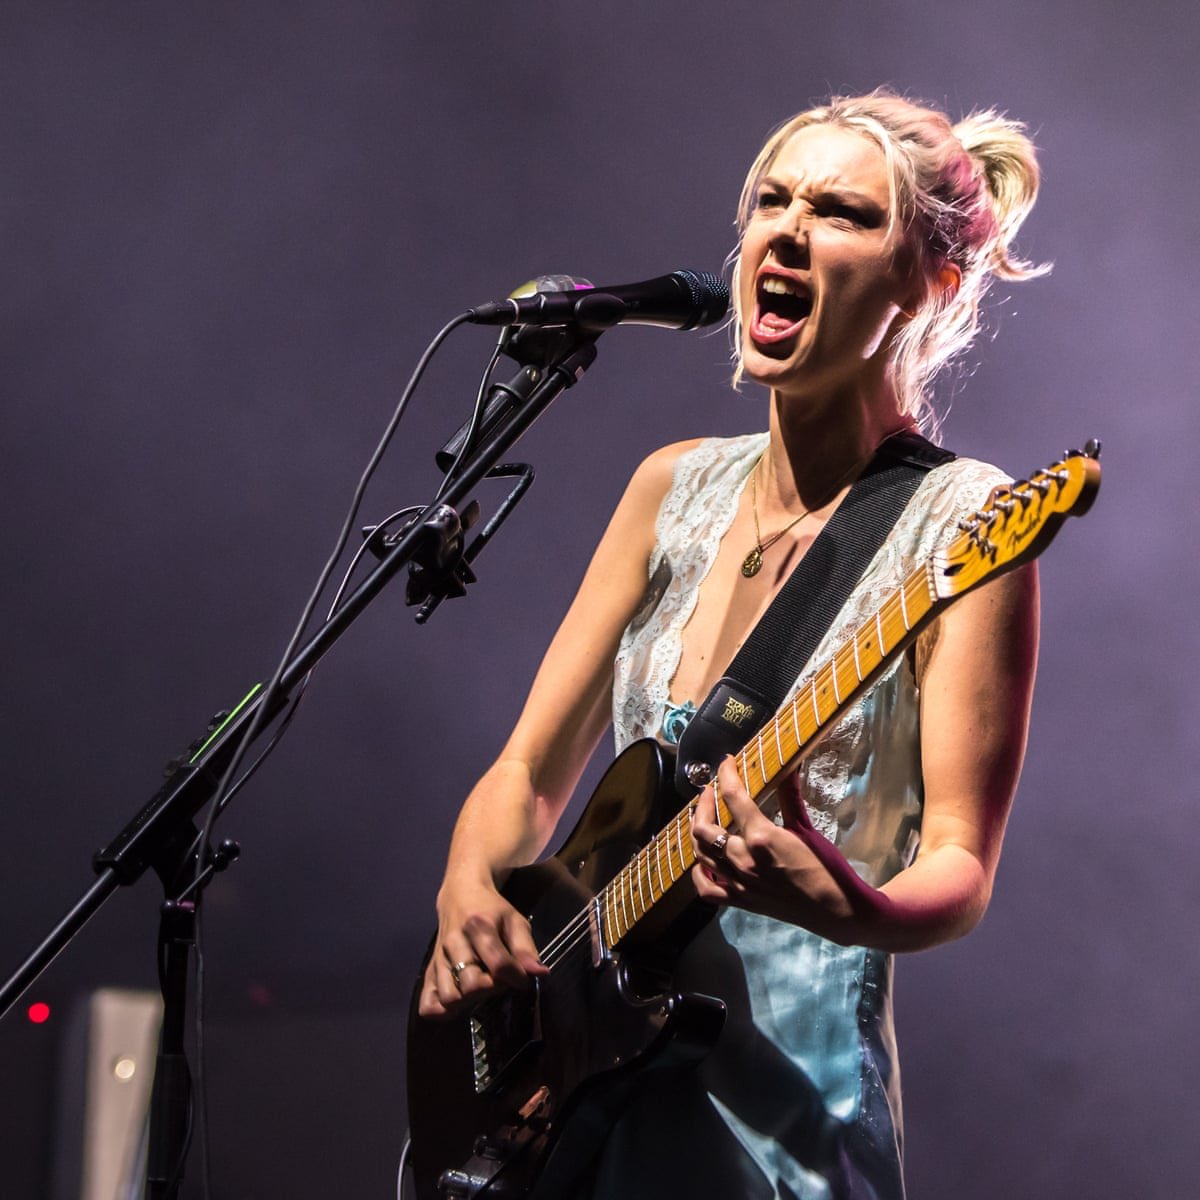  @wolfalicemusic to get some bands involved  @OfficialRandL